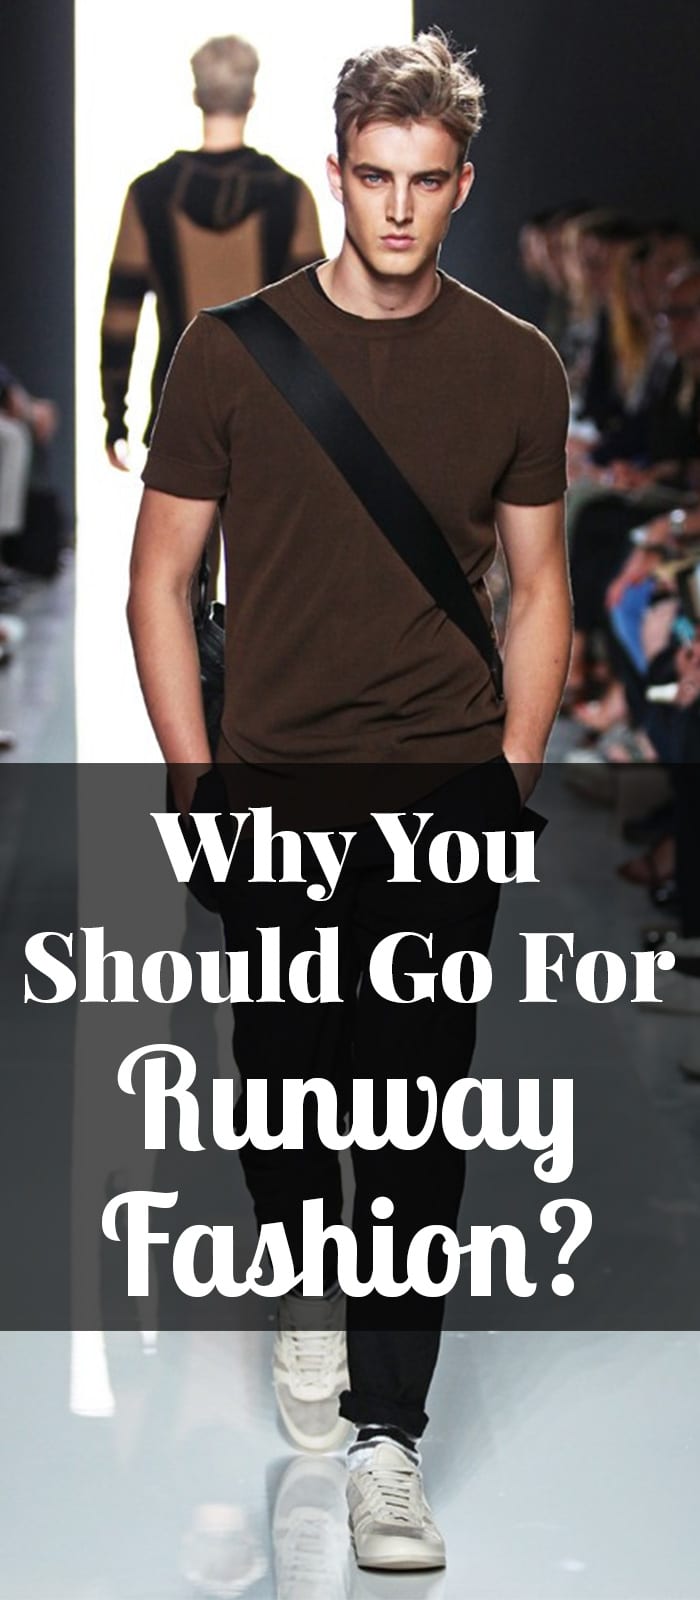 Why You Should Go For Runway Fashion